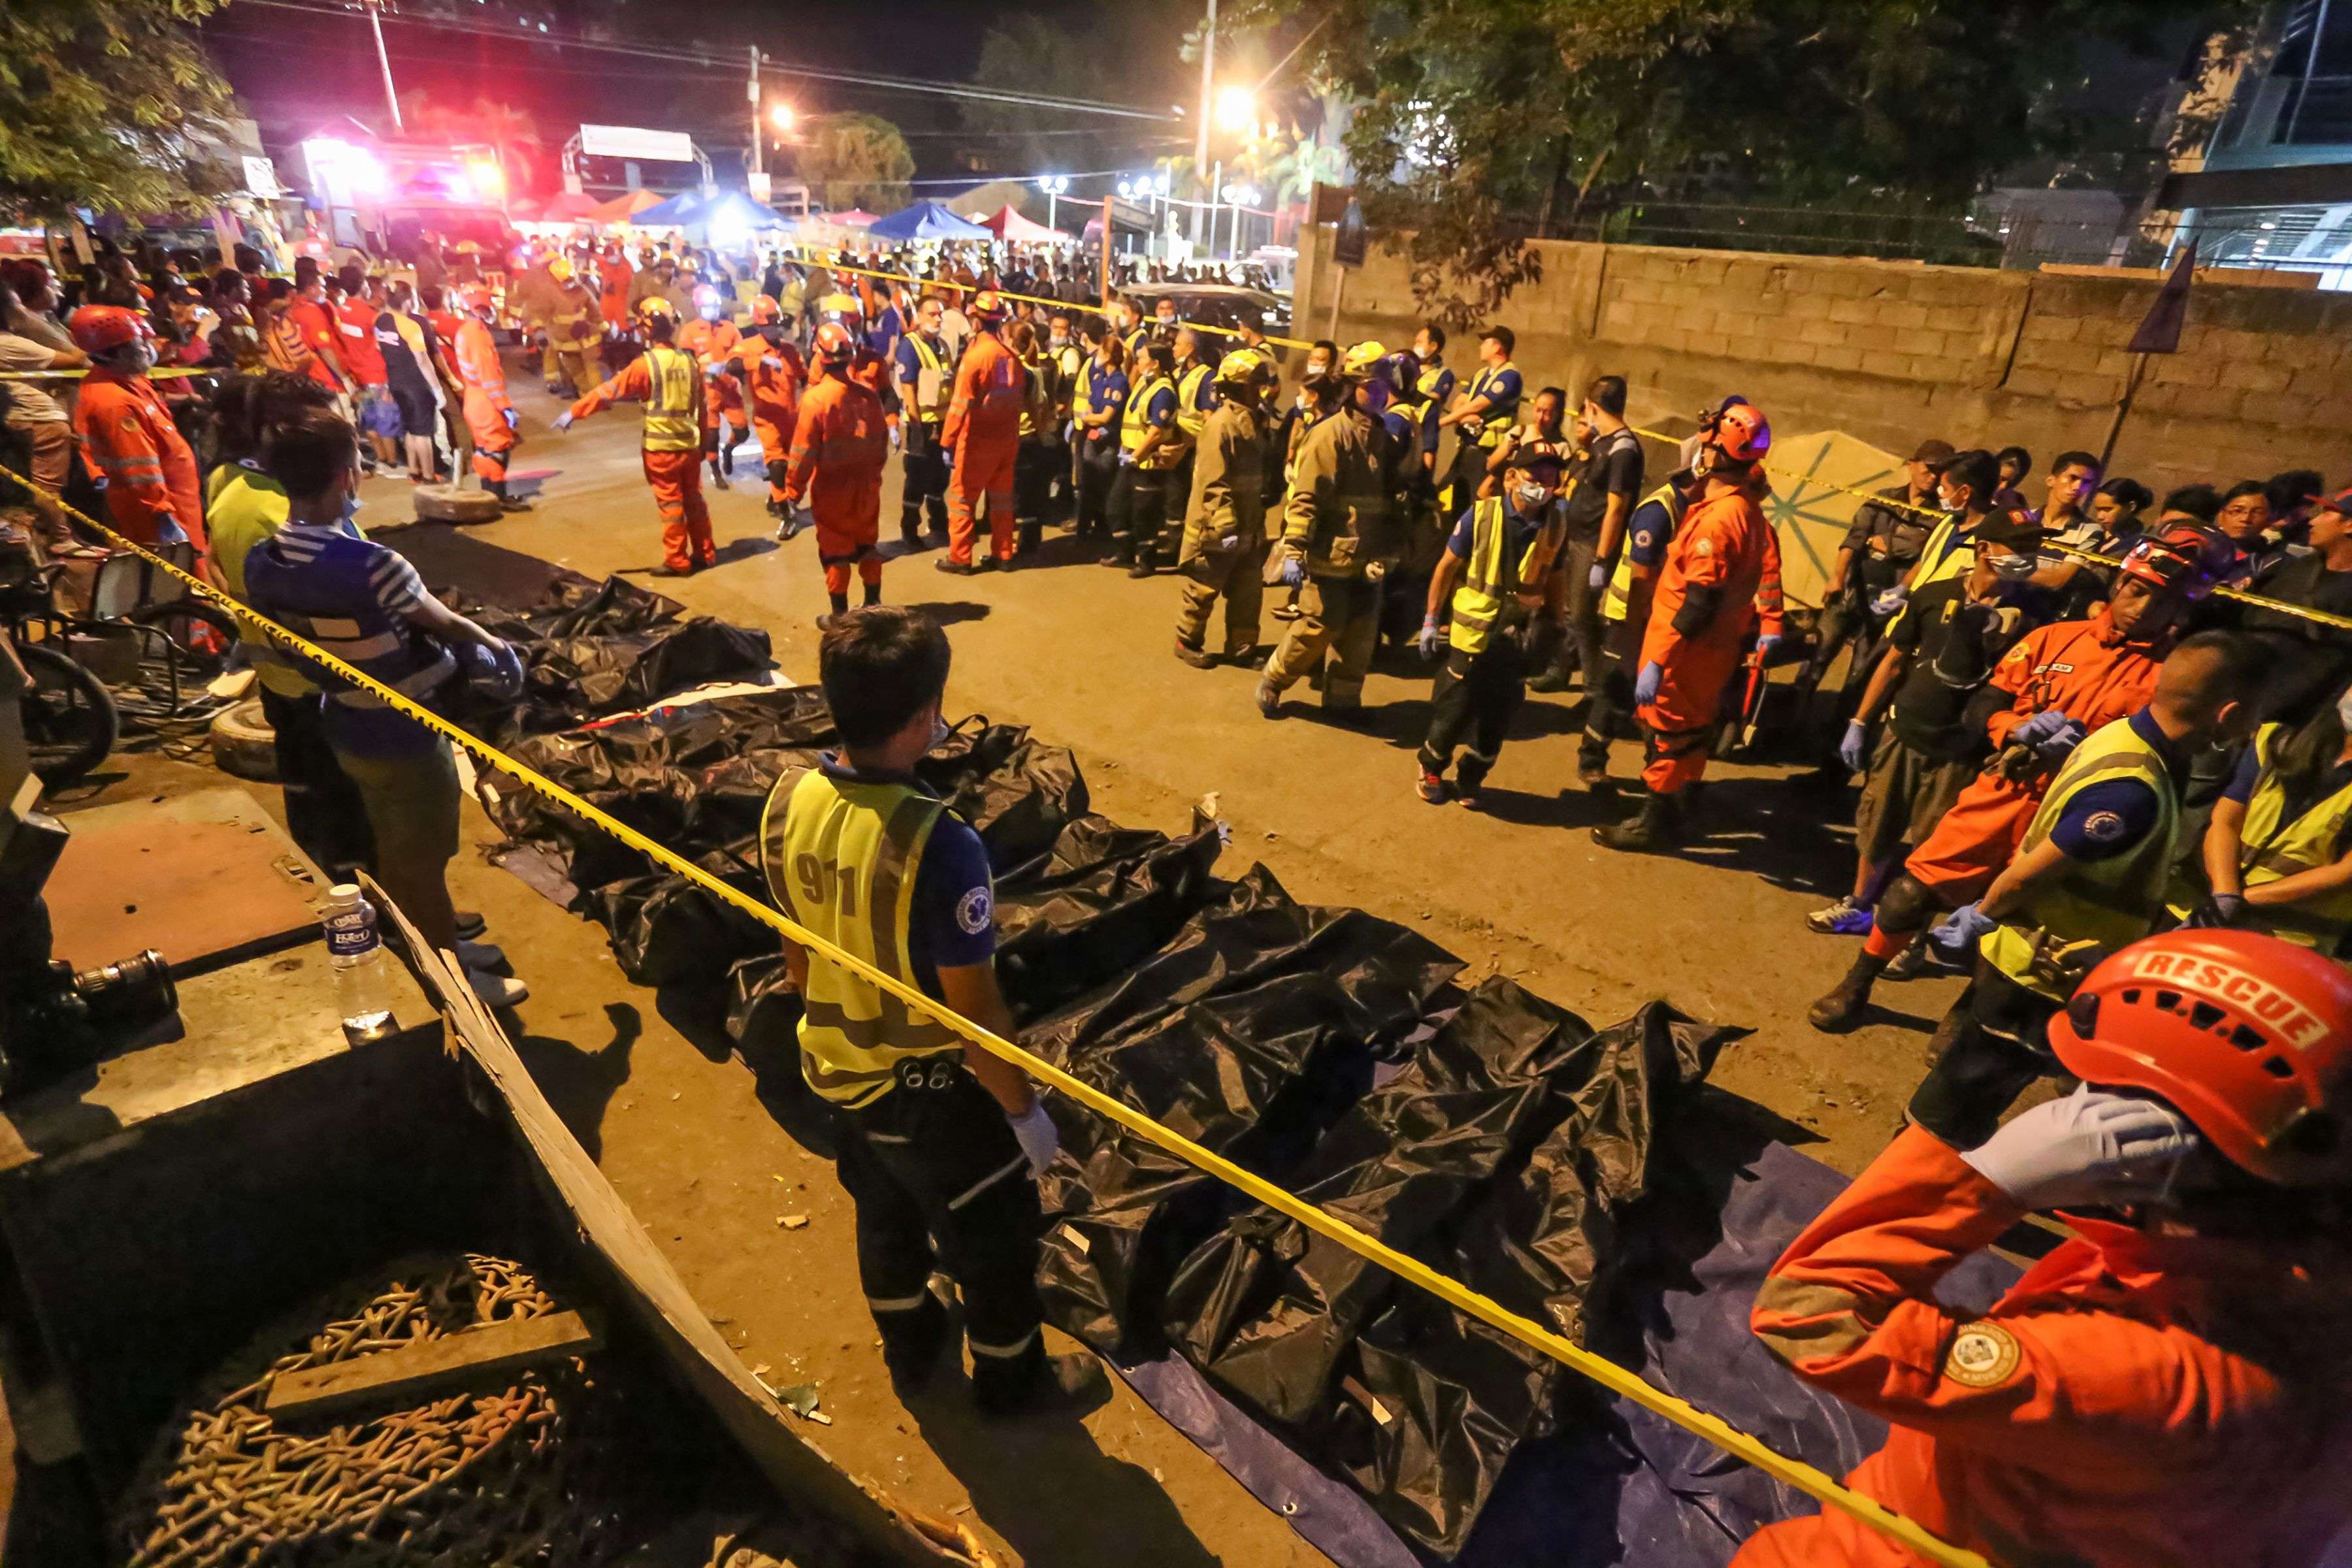 Rescue workers gather the bodies of victims of an explosion at a night market in Davao City in the Philippines on September 3, 2016. The Abu Sayyaf group claimed responsibility for the deadly blast. Photo: AFP